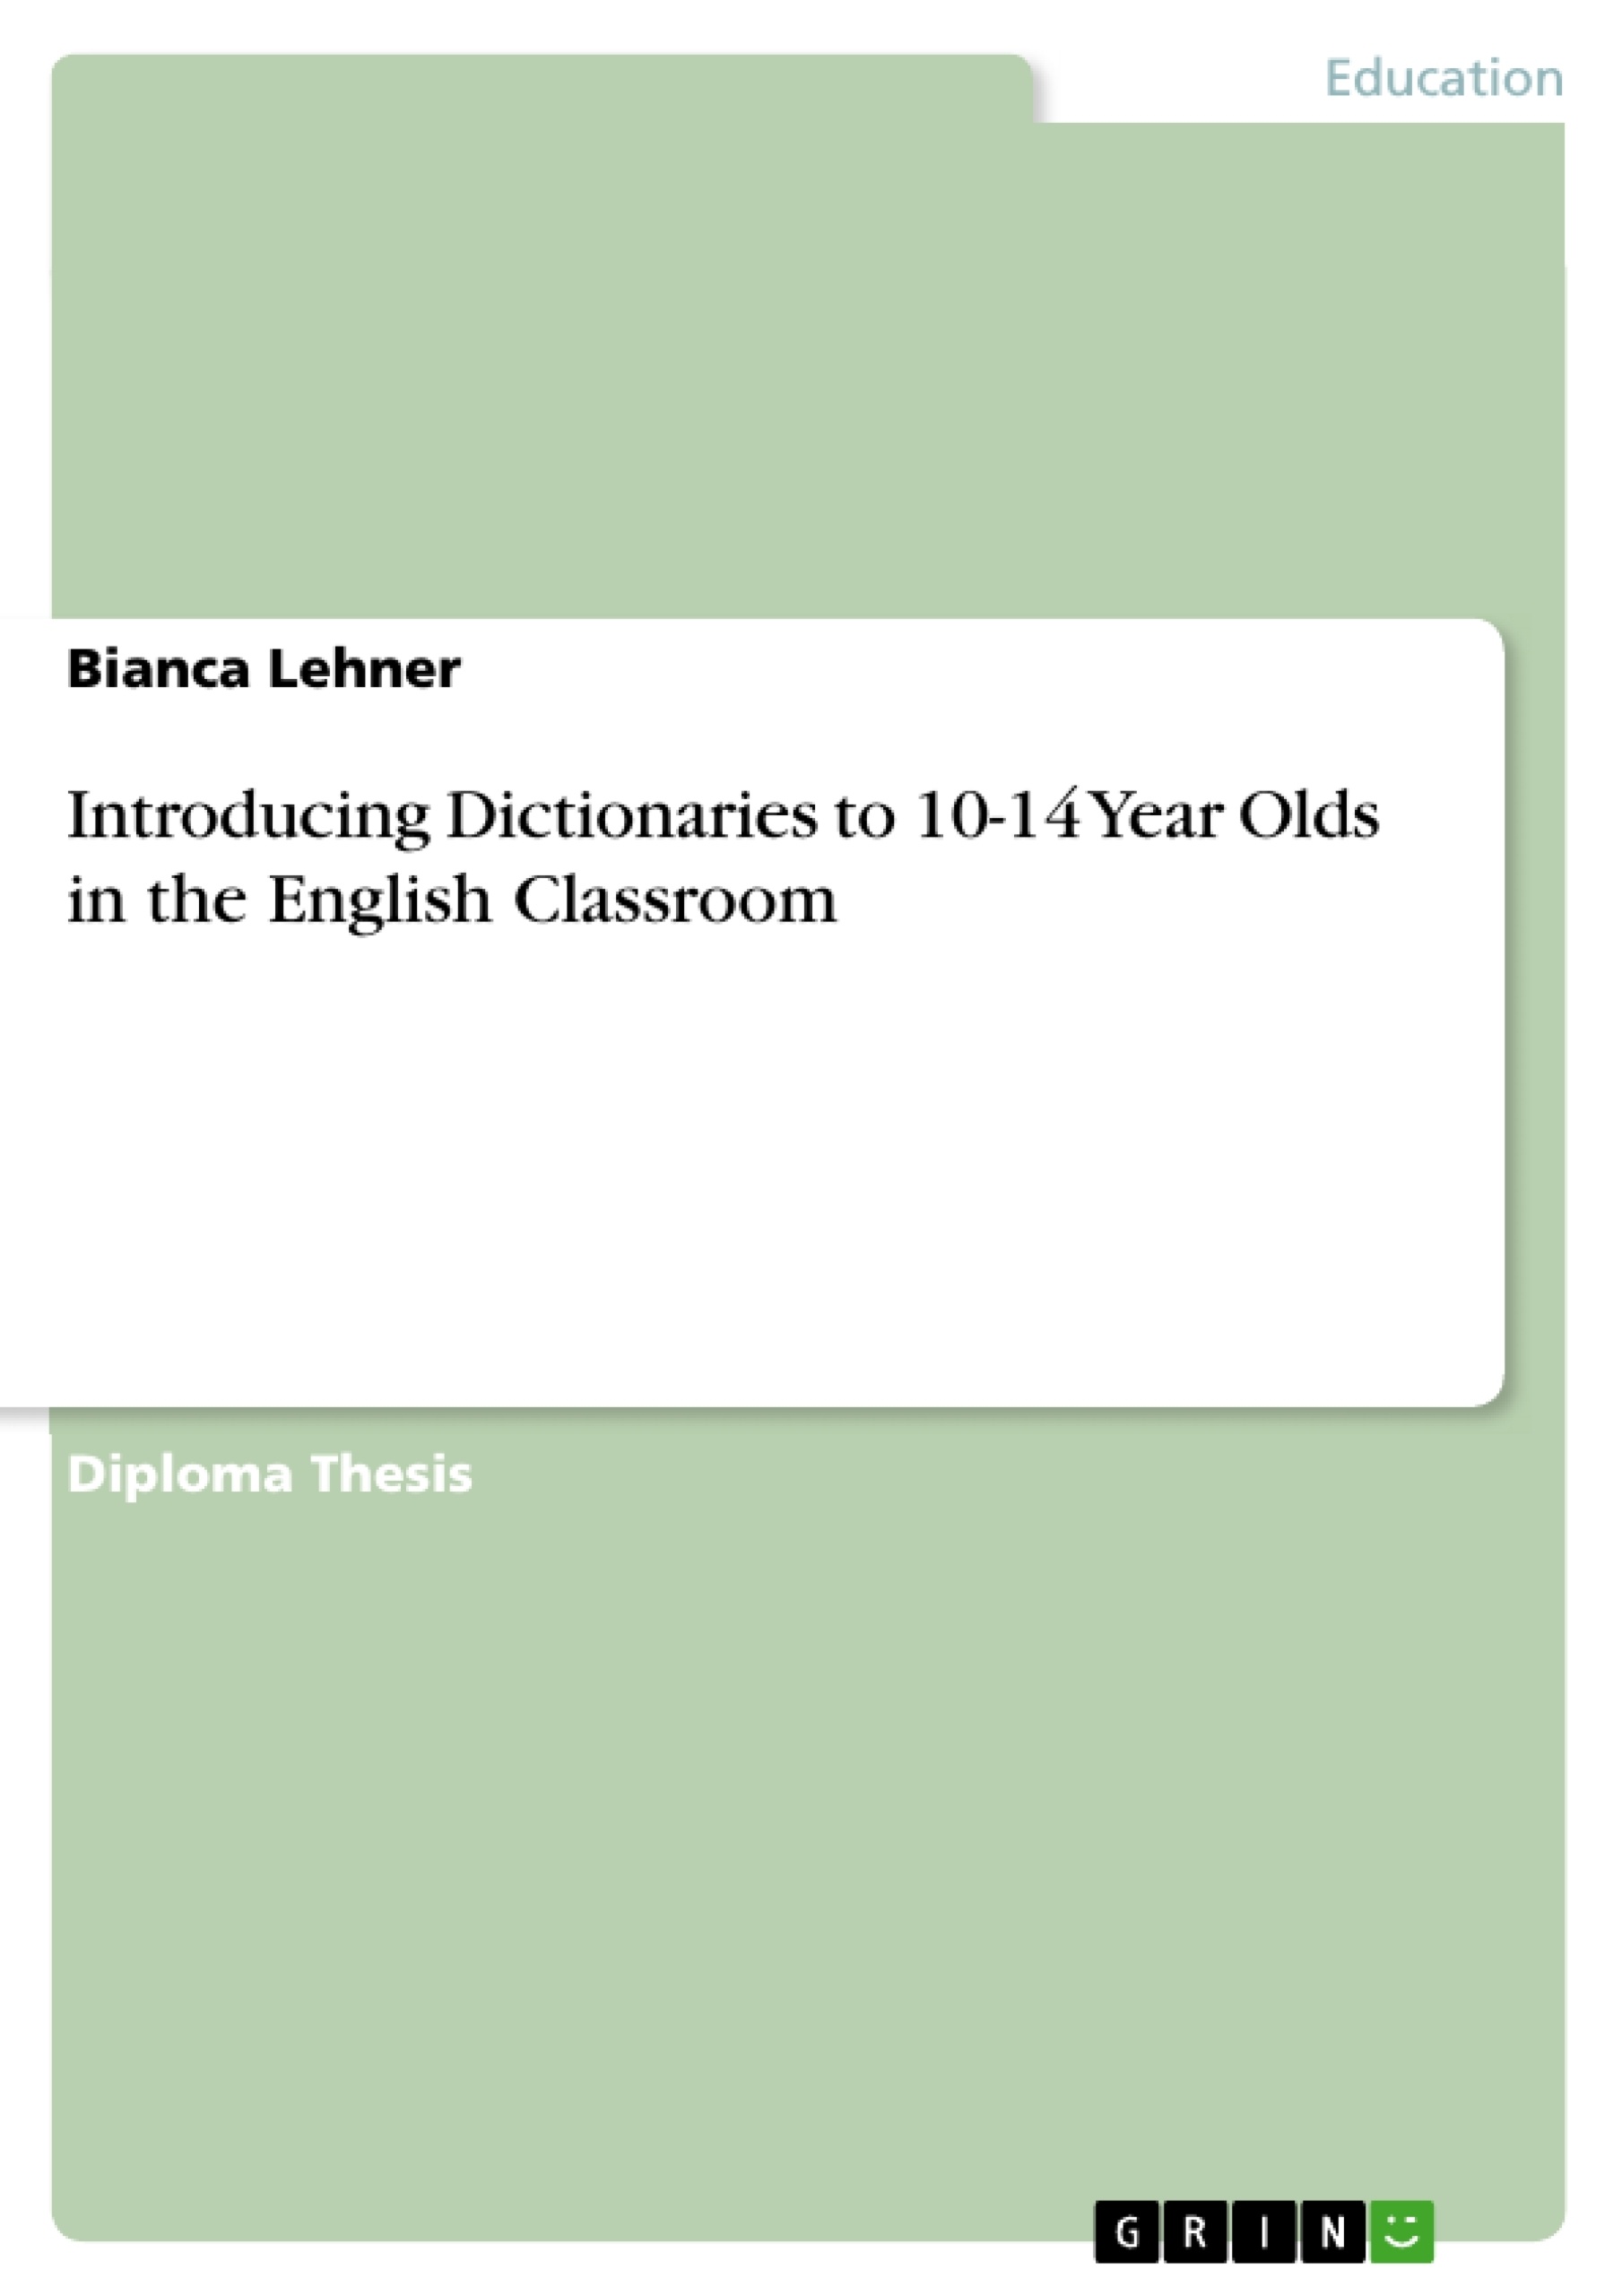 Titre: Introducing Dictionaries to 10-14 Year Olds in the English Classroom